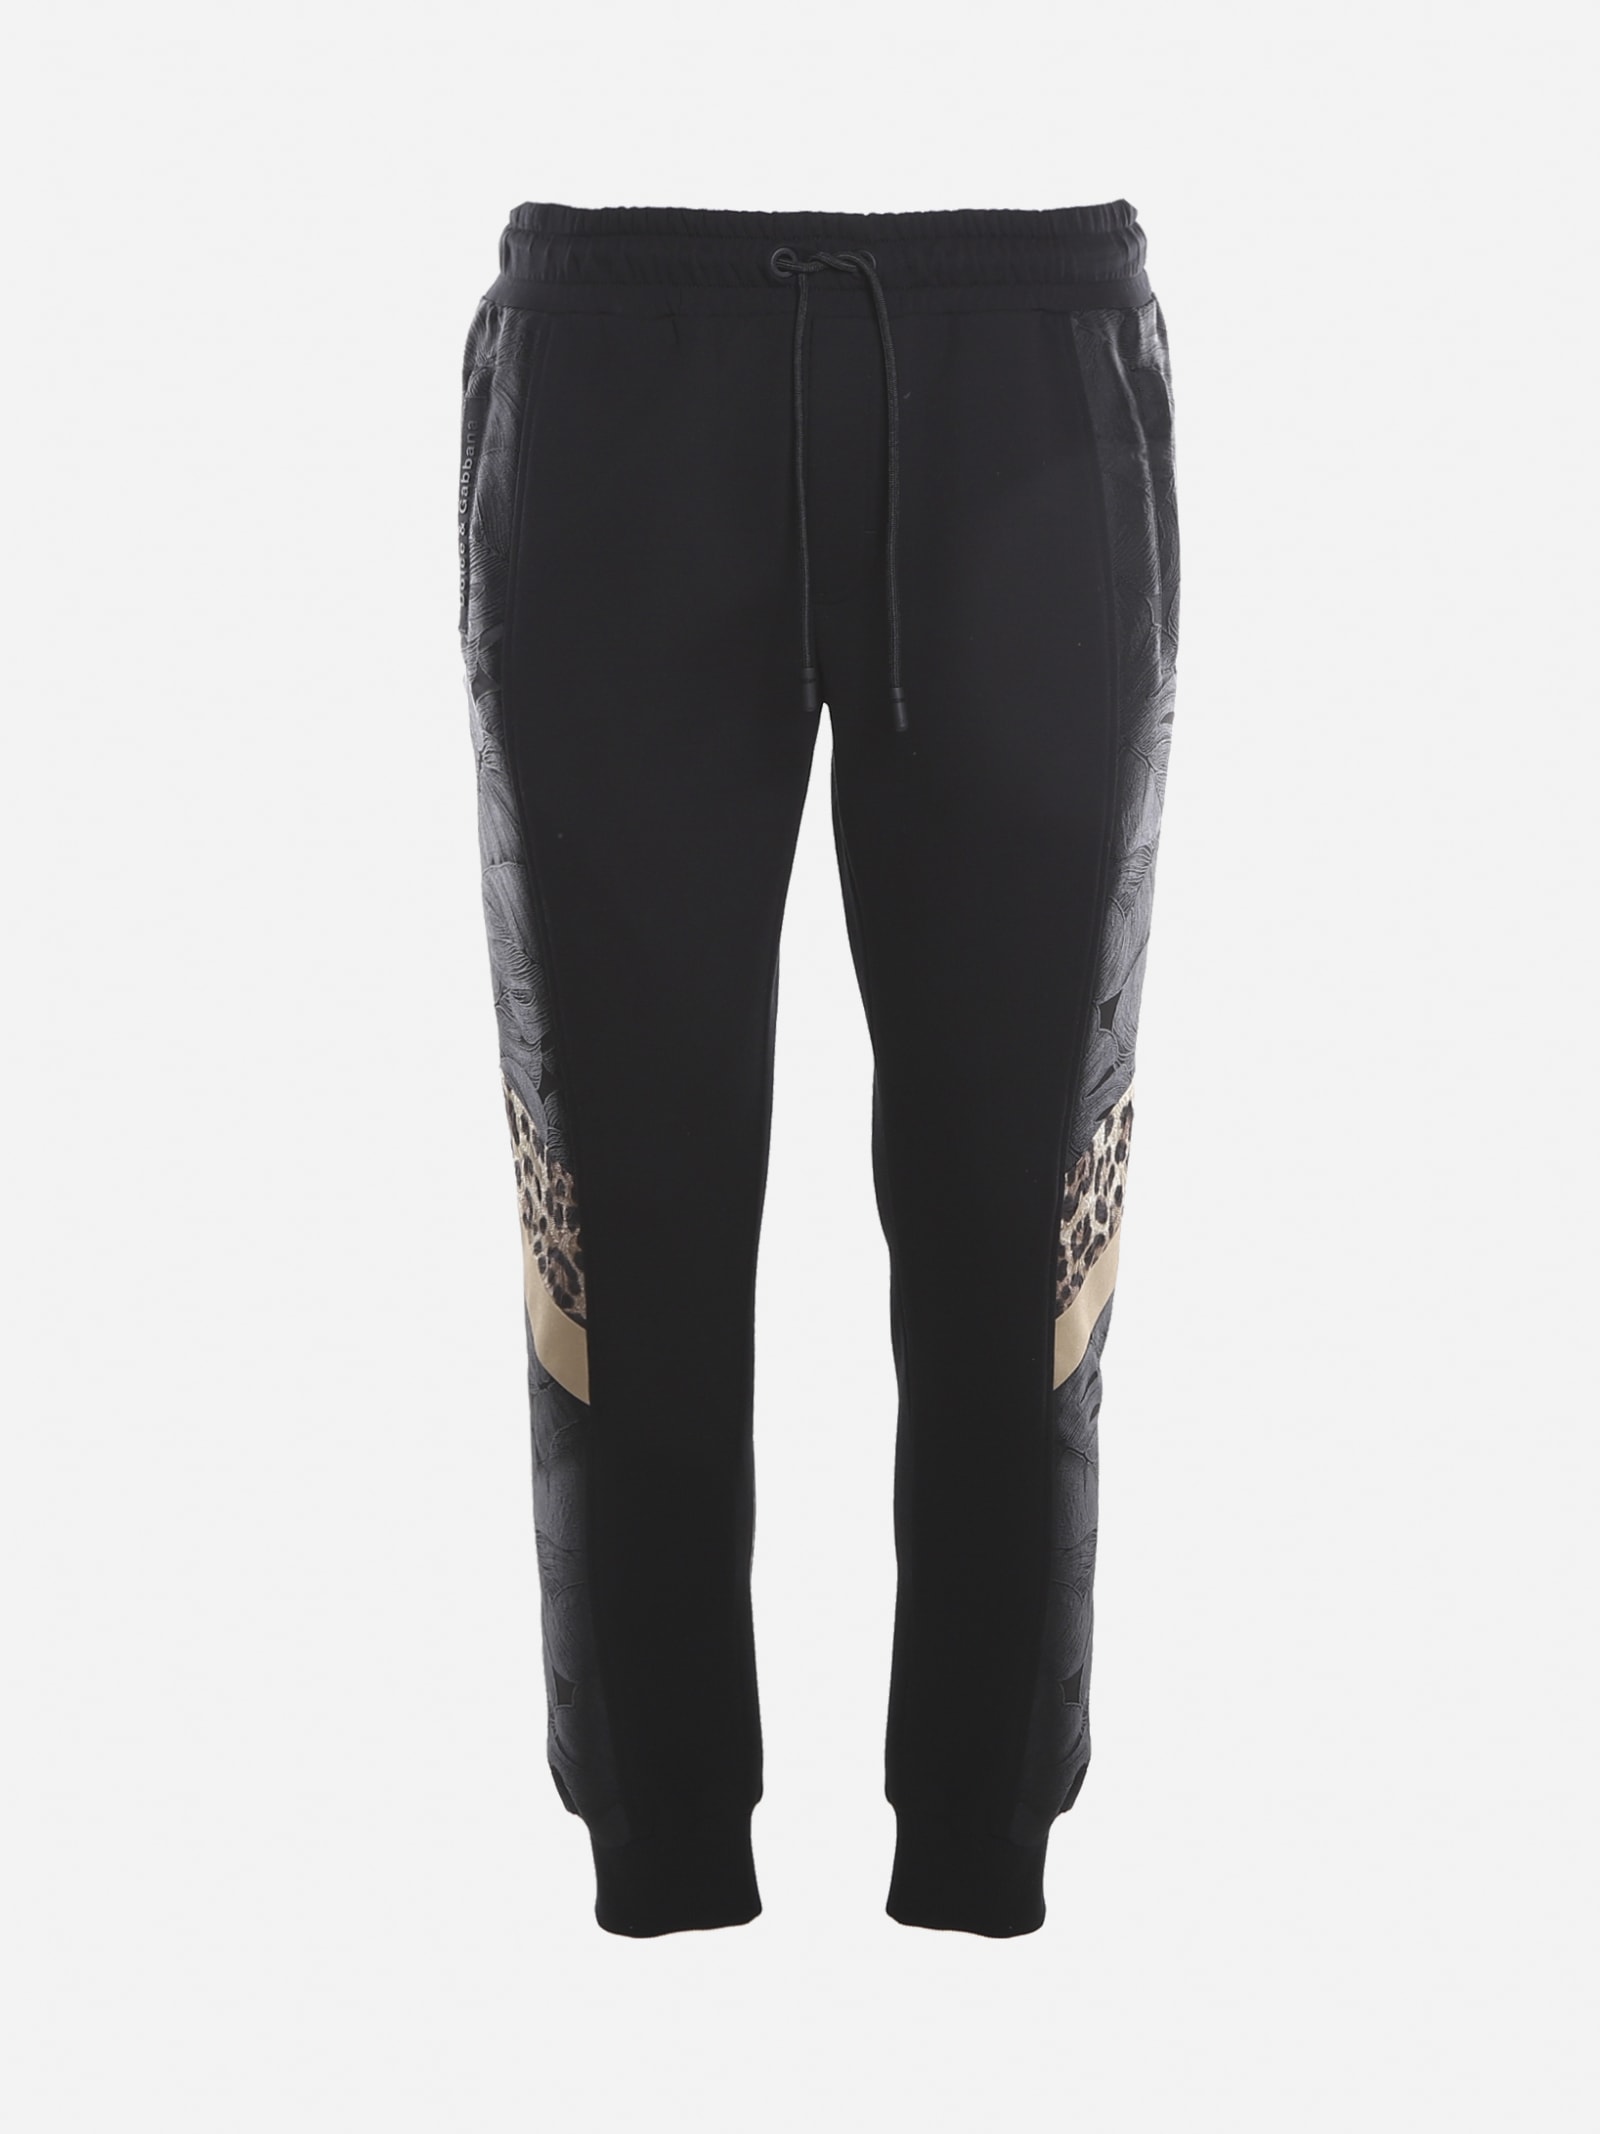 Dolce & Gabbana Cotton Blend Trousers With Leopard Print Inserts